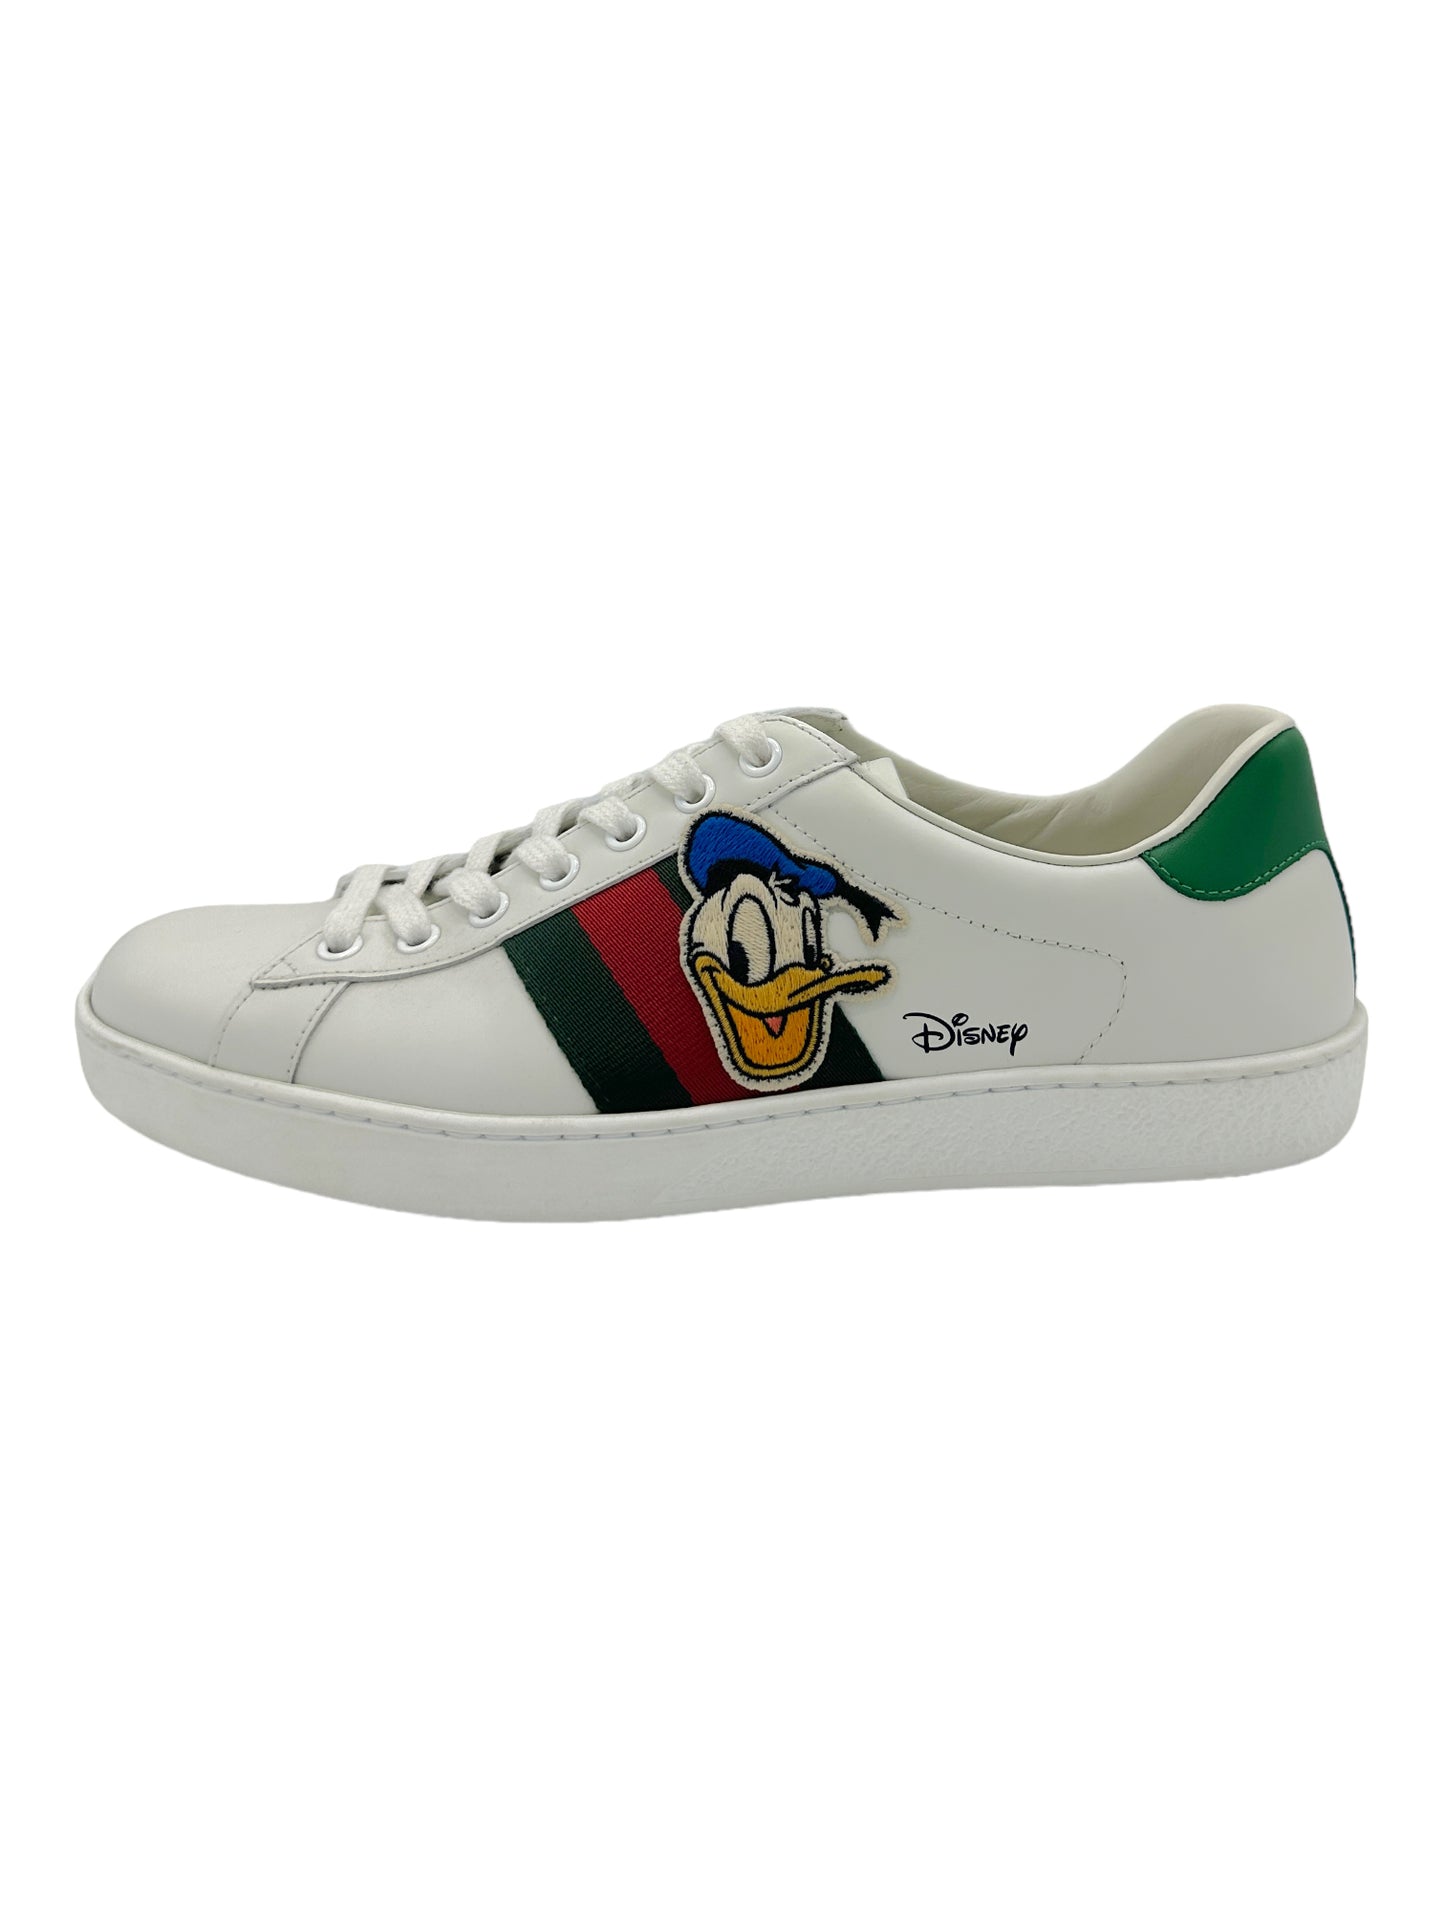 Gucci X Disney Ace Donald Duck Low Leather Trainer Sneakers